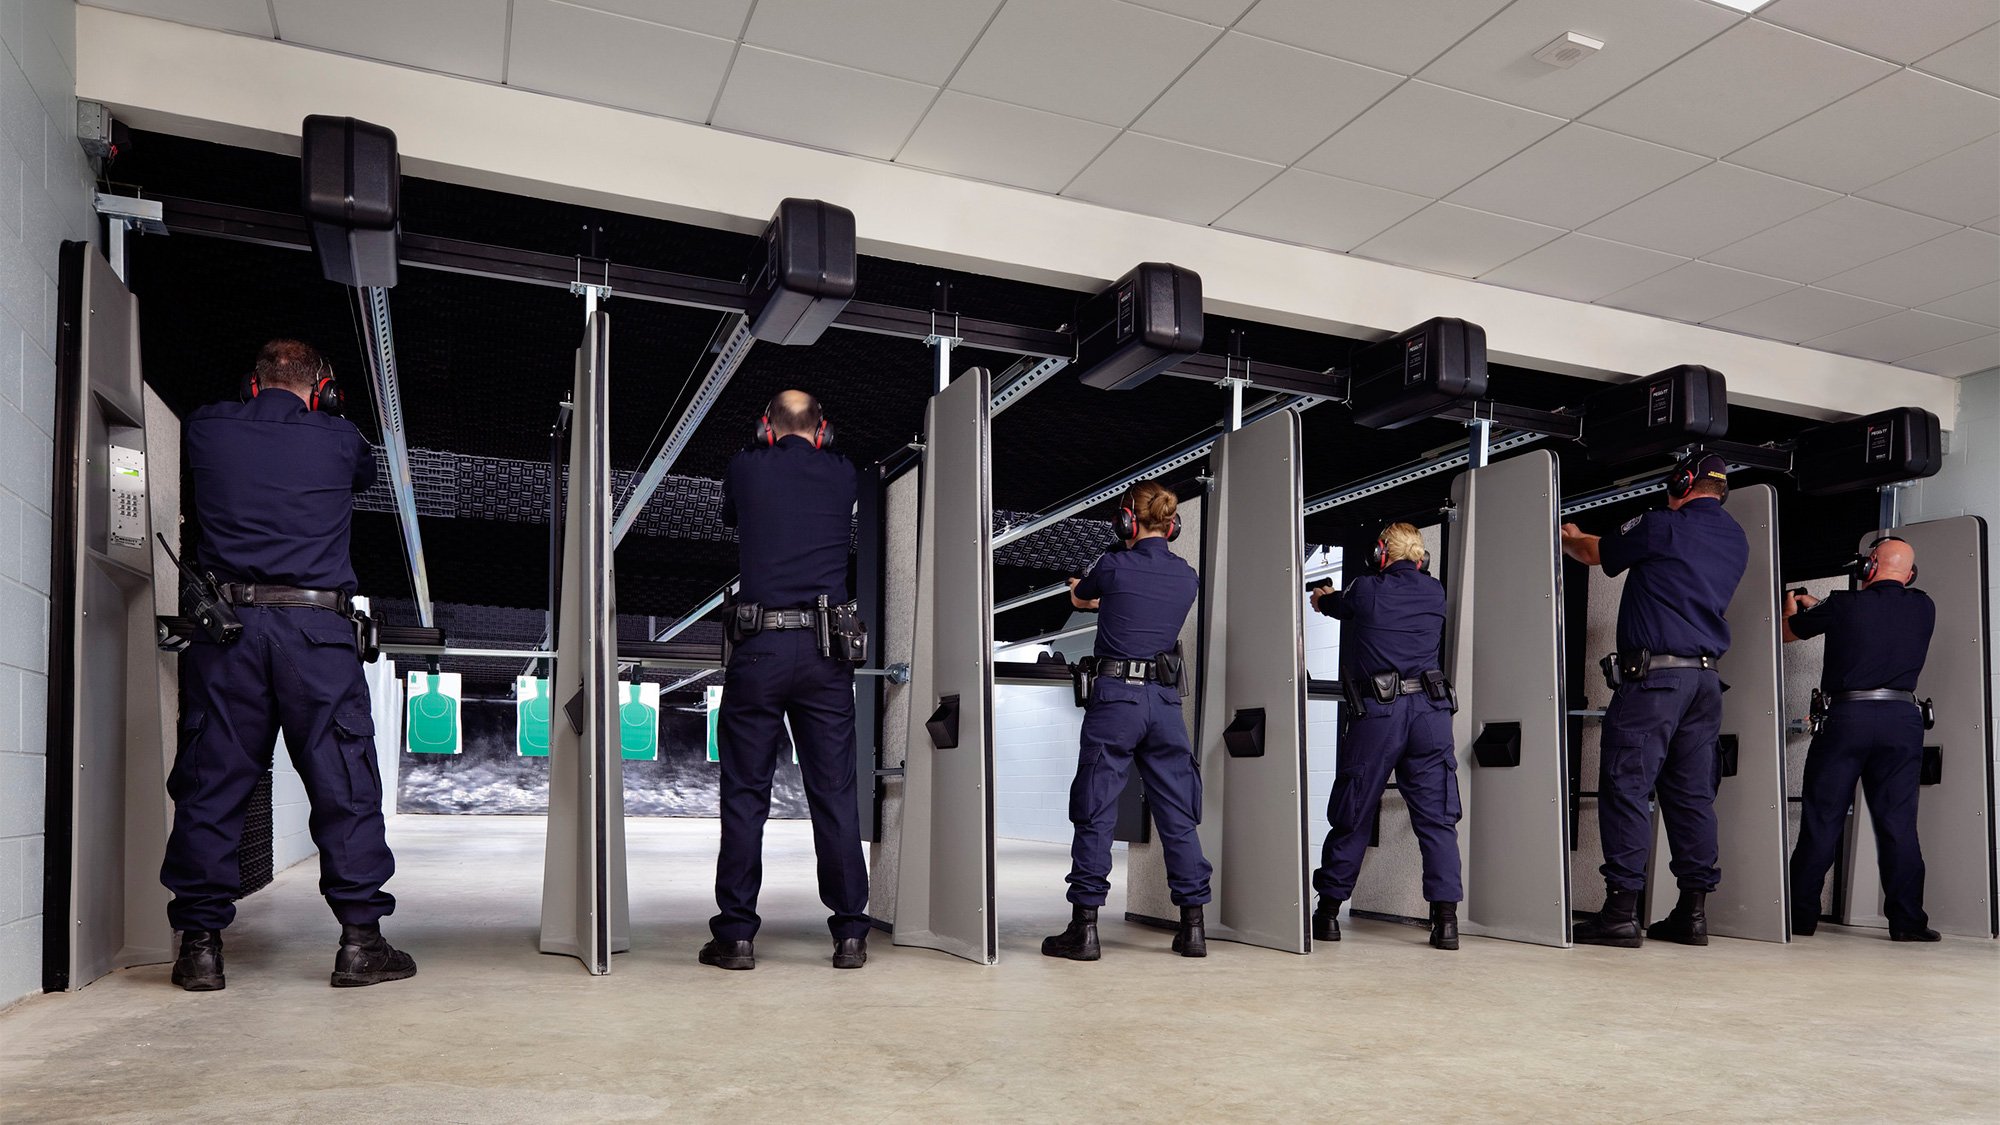 Shooting certification at the Calais Land Port of Entry